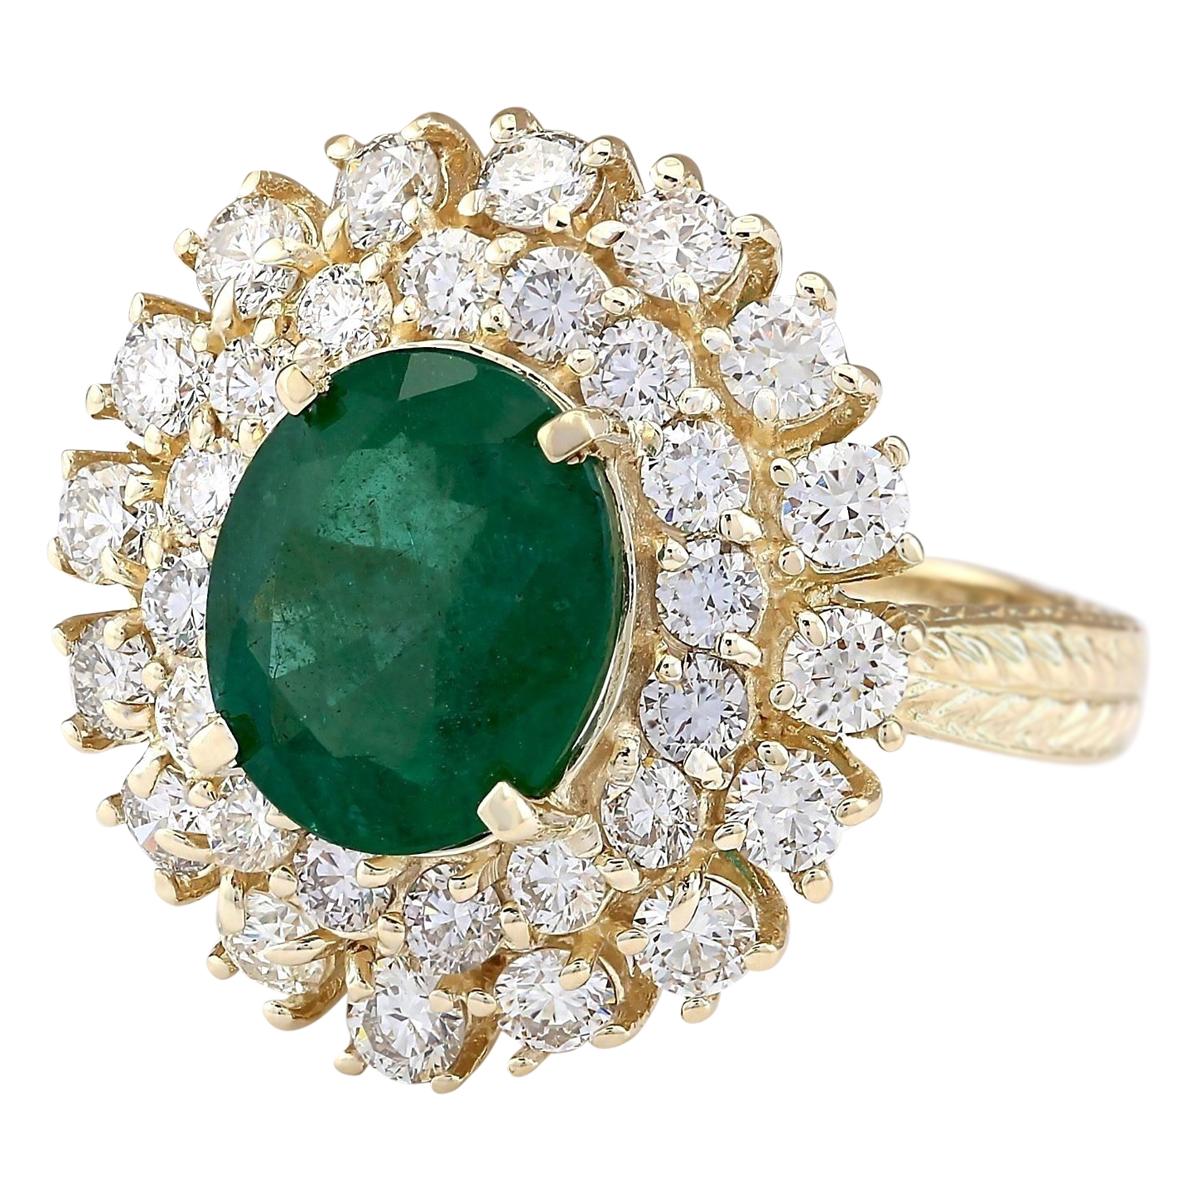 Presenting our exquisite 6.65 Carat Emerald 14 Karat Yellow Gold Diamond Ring.

Stamped with authenticity, this ring boasts 14K Yellow Gold and weighs a total of 9.0 grams.

At its center shines a magnificent emerald, weighing 4.30 carats and